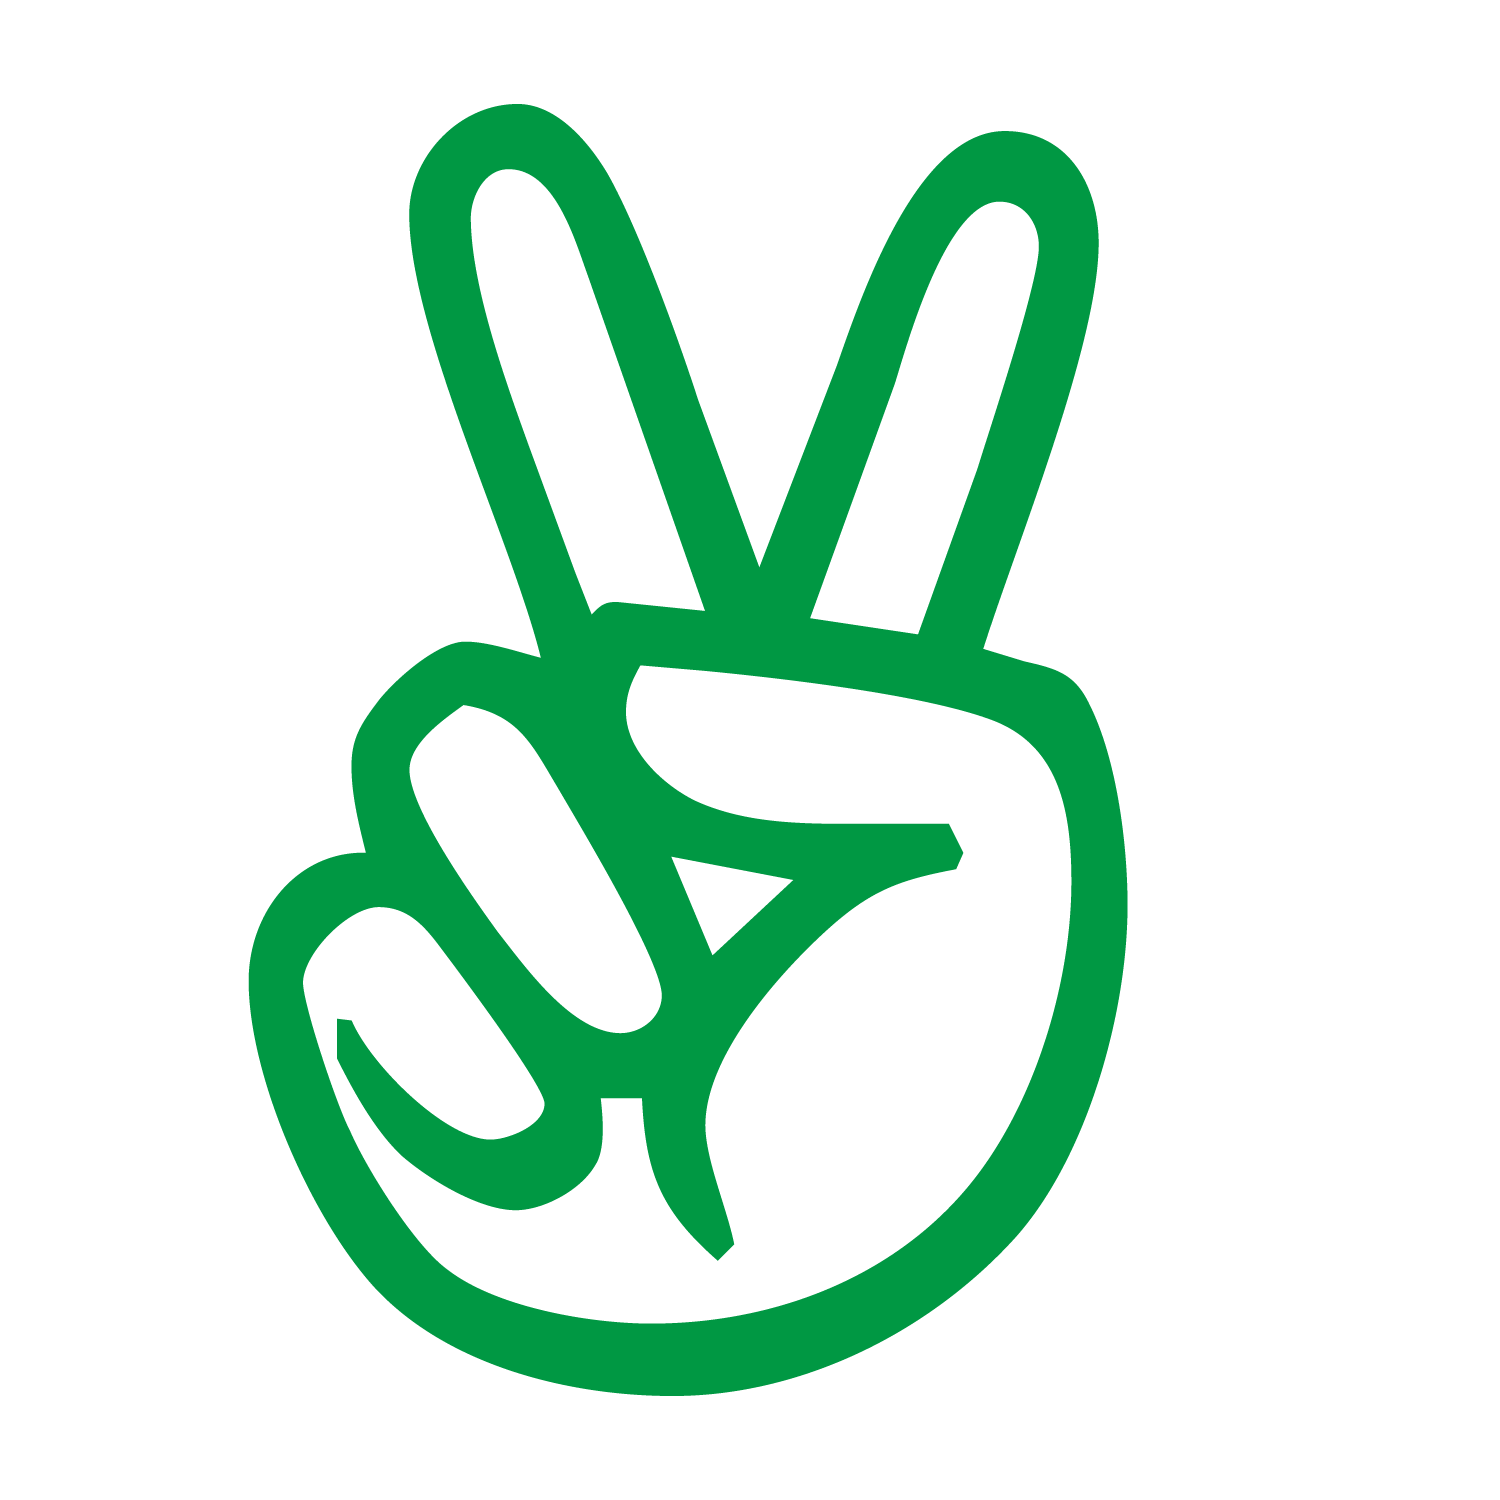 Peace symbols Hand V sign - Green yes gesture vector material png ...